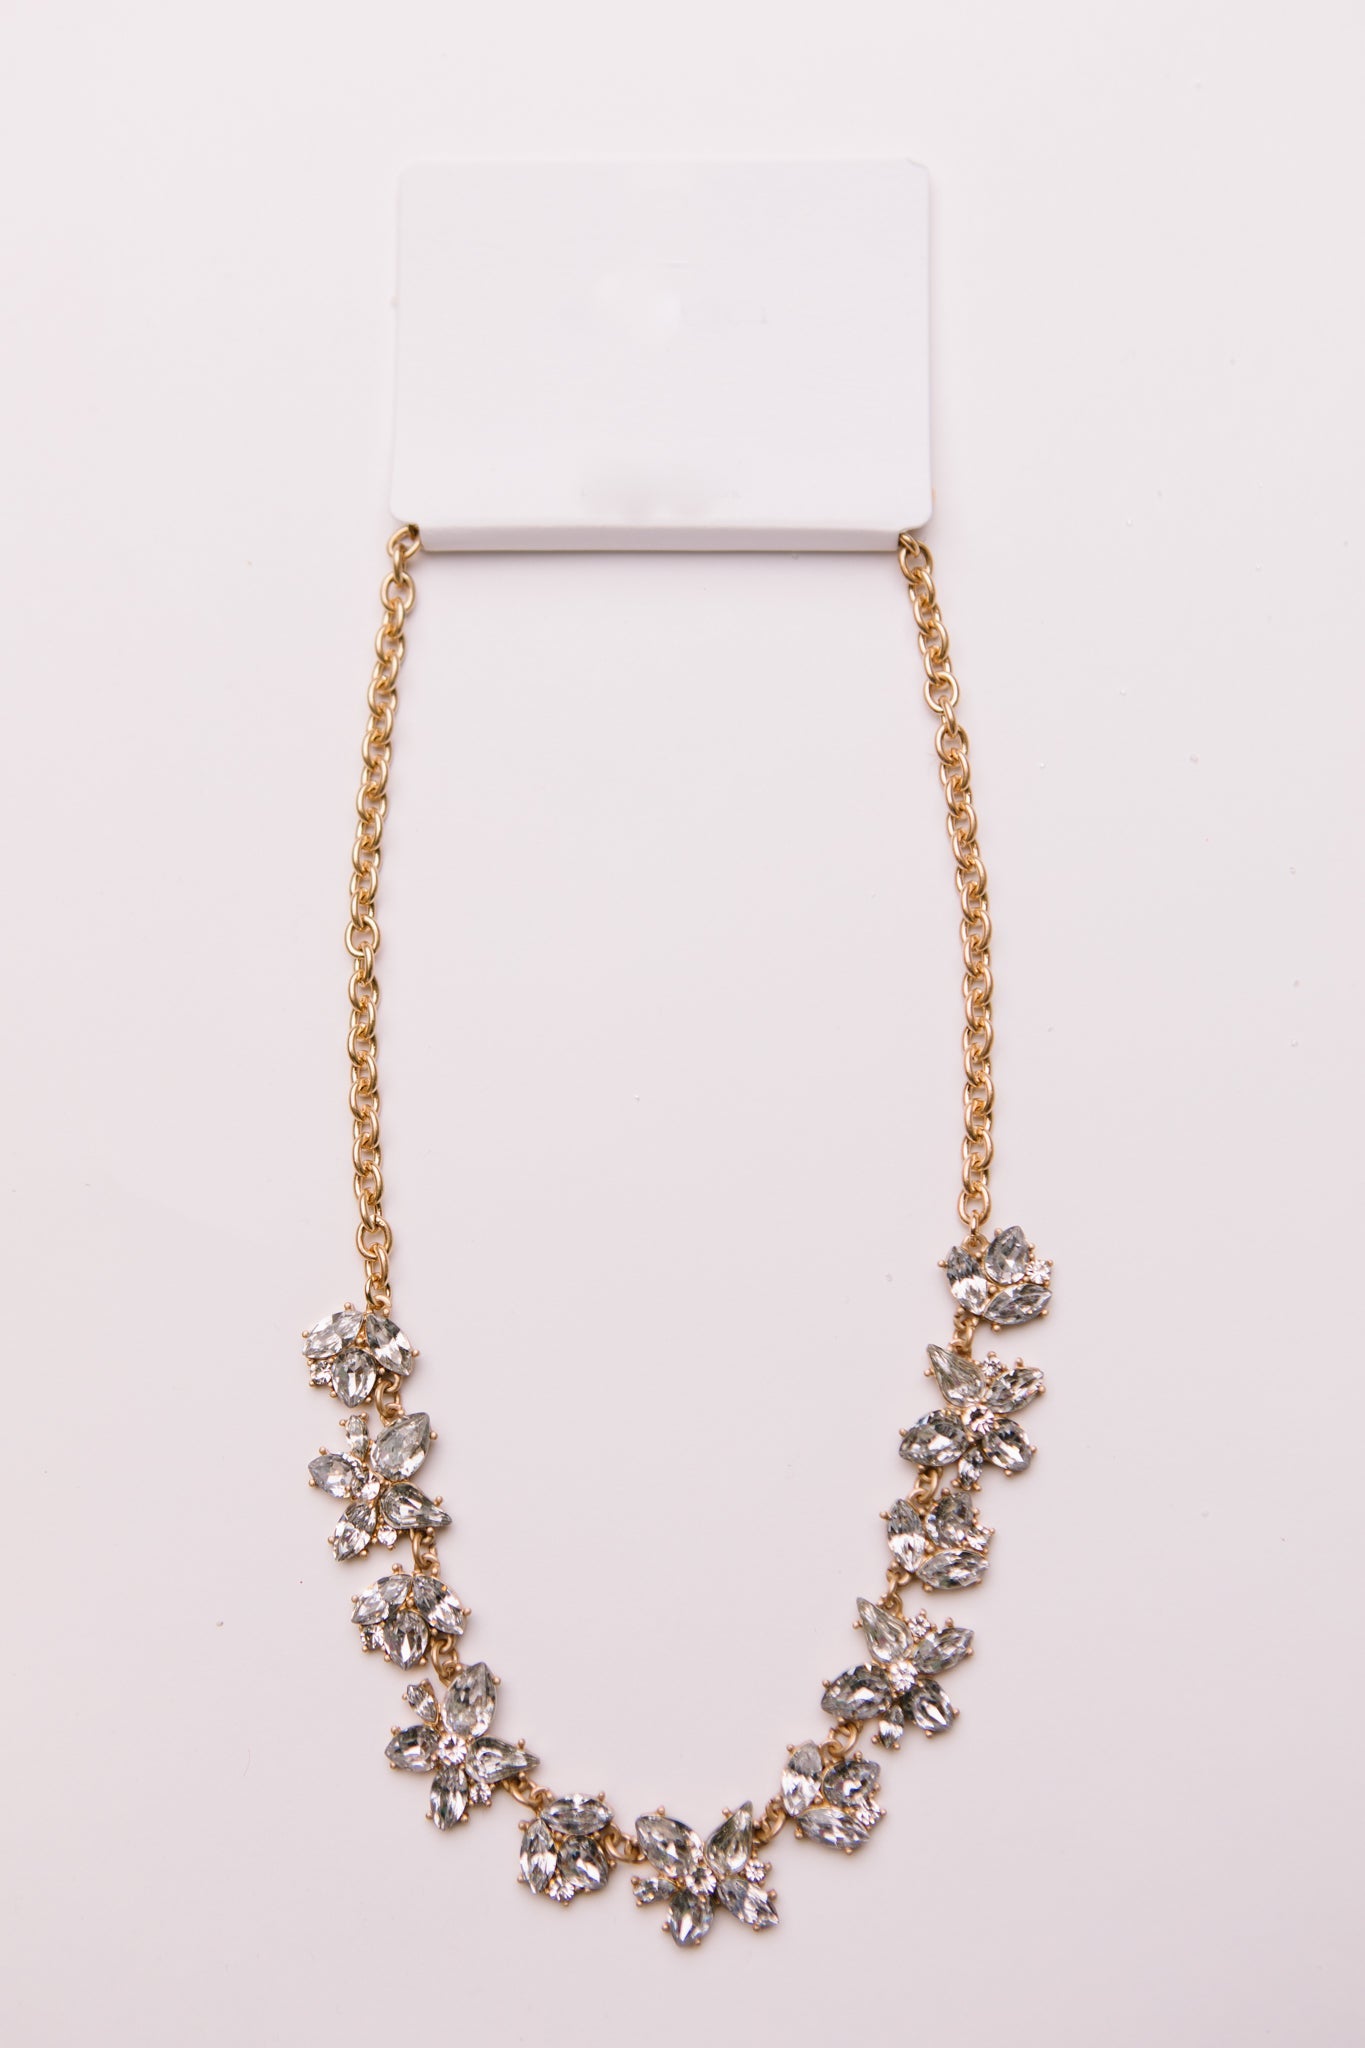 Rhinestone Tiered Floral Necklace